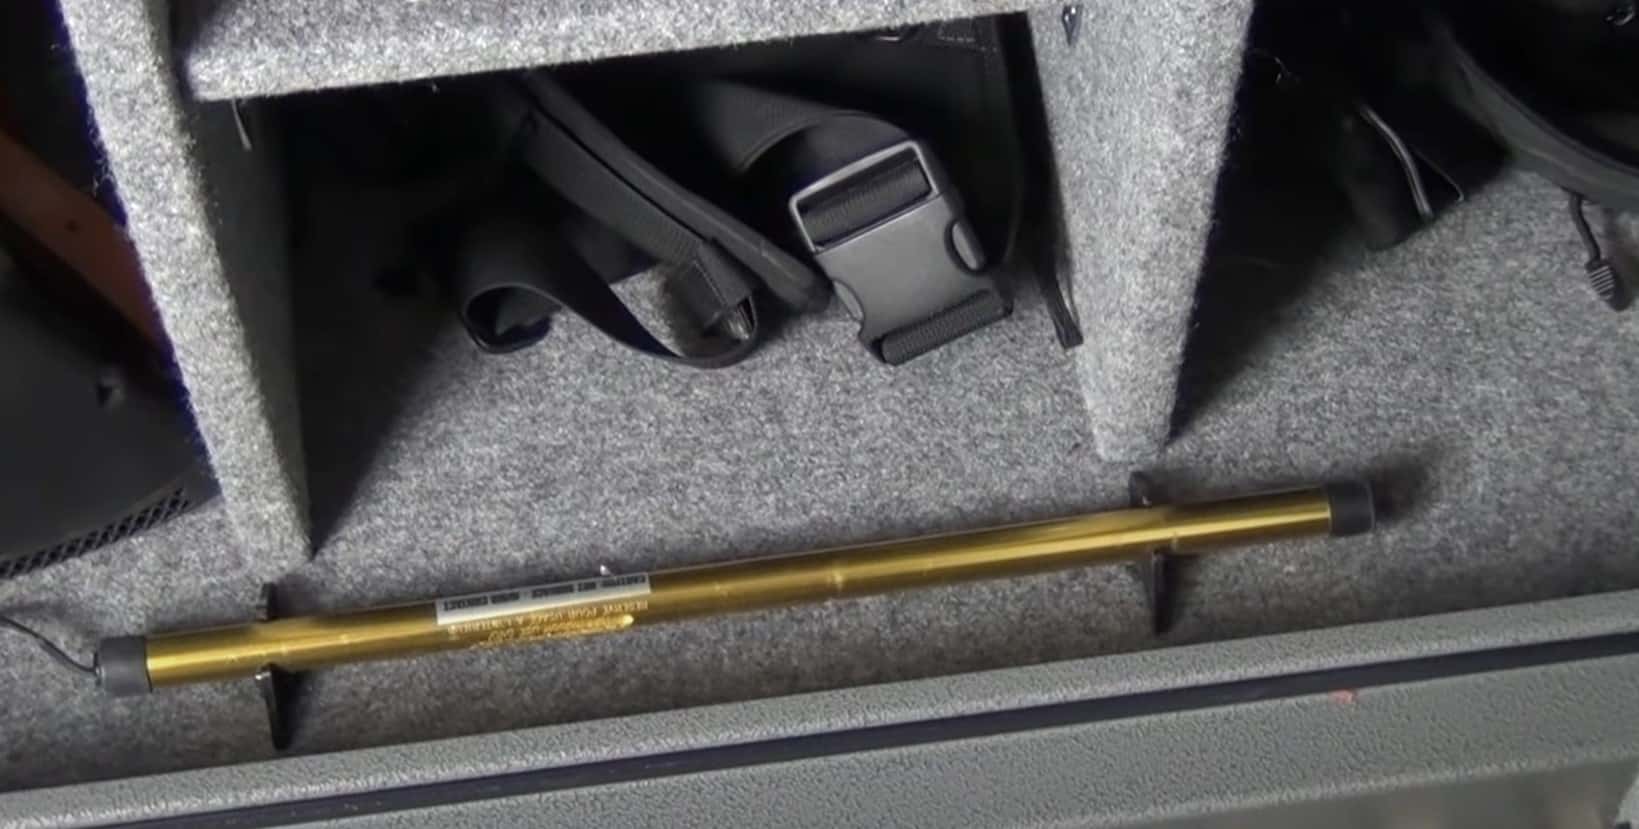 How To Install a Dehumidifier In Your Gun Safe